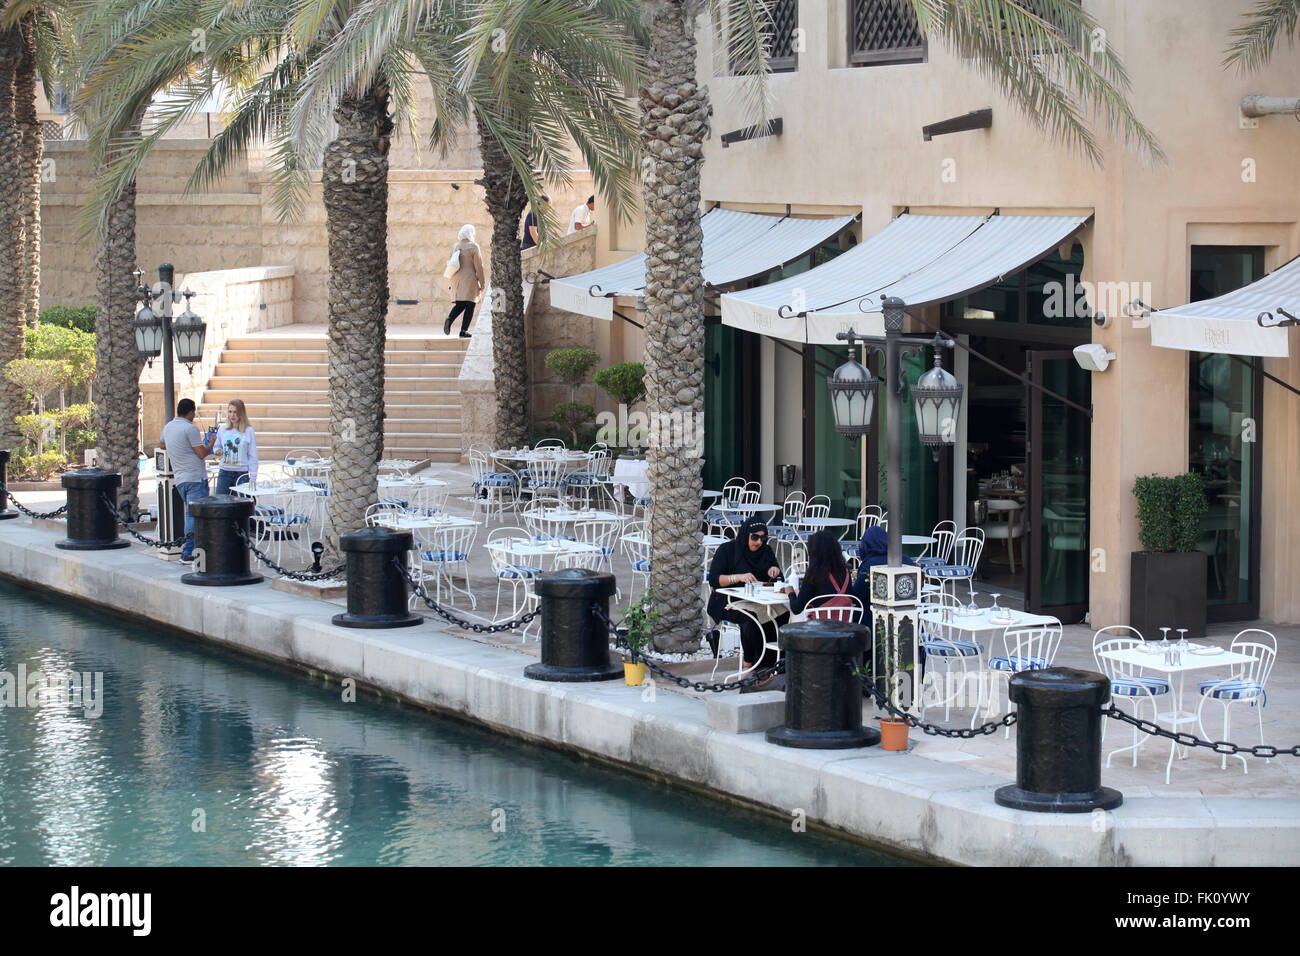 Blond chats with arab man, while arab ladies dine in Madinat Jumairah in quiet February afternoon. Stock Photo